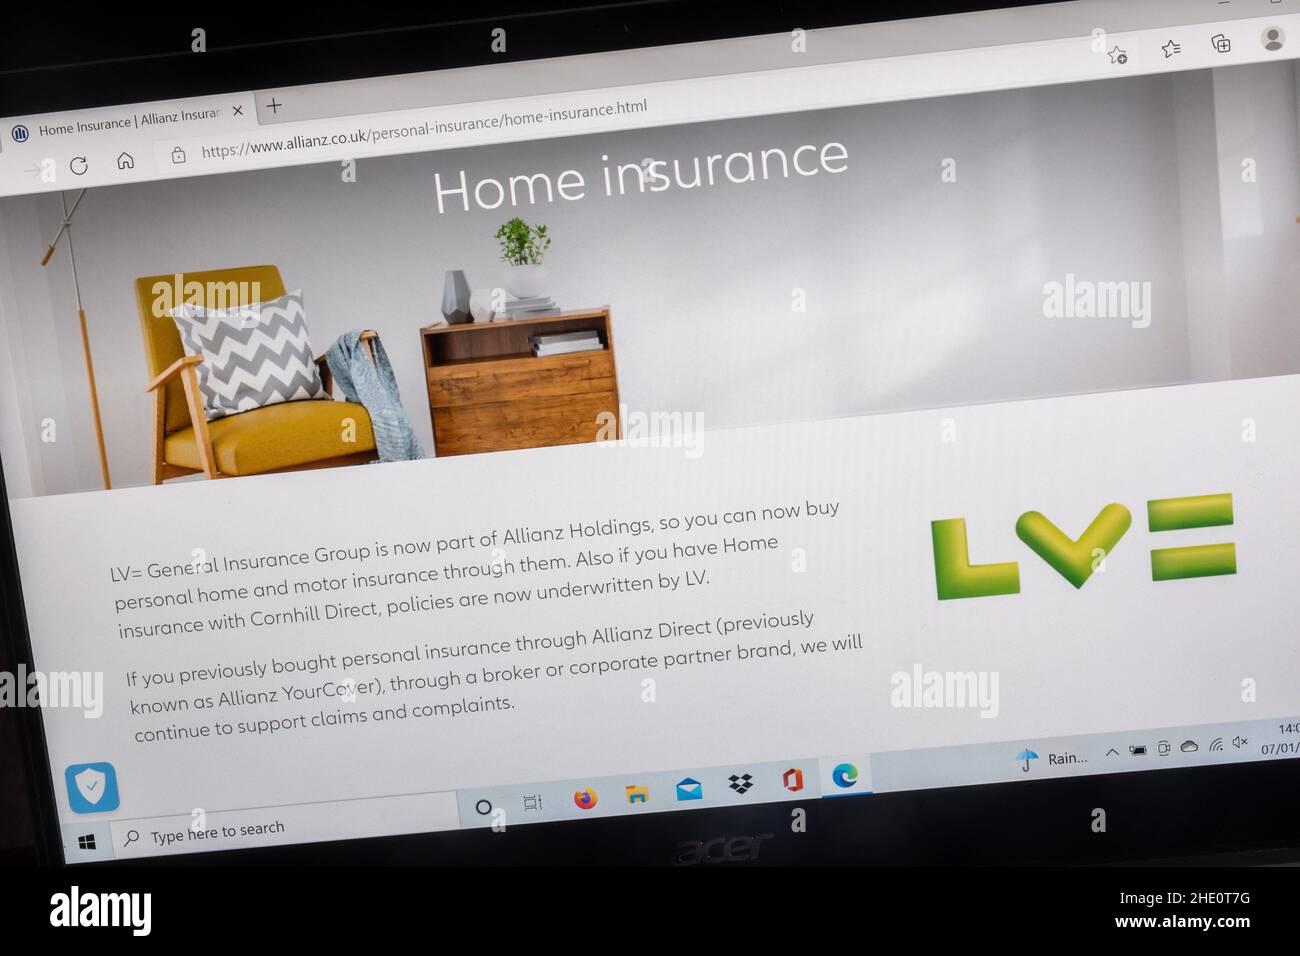 LV= Liverpool Victoria insurance company website on a laptop computer screen, UK. Home insurance page. Stock Photo